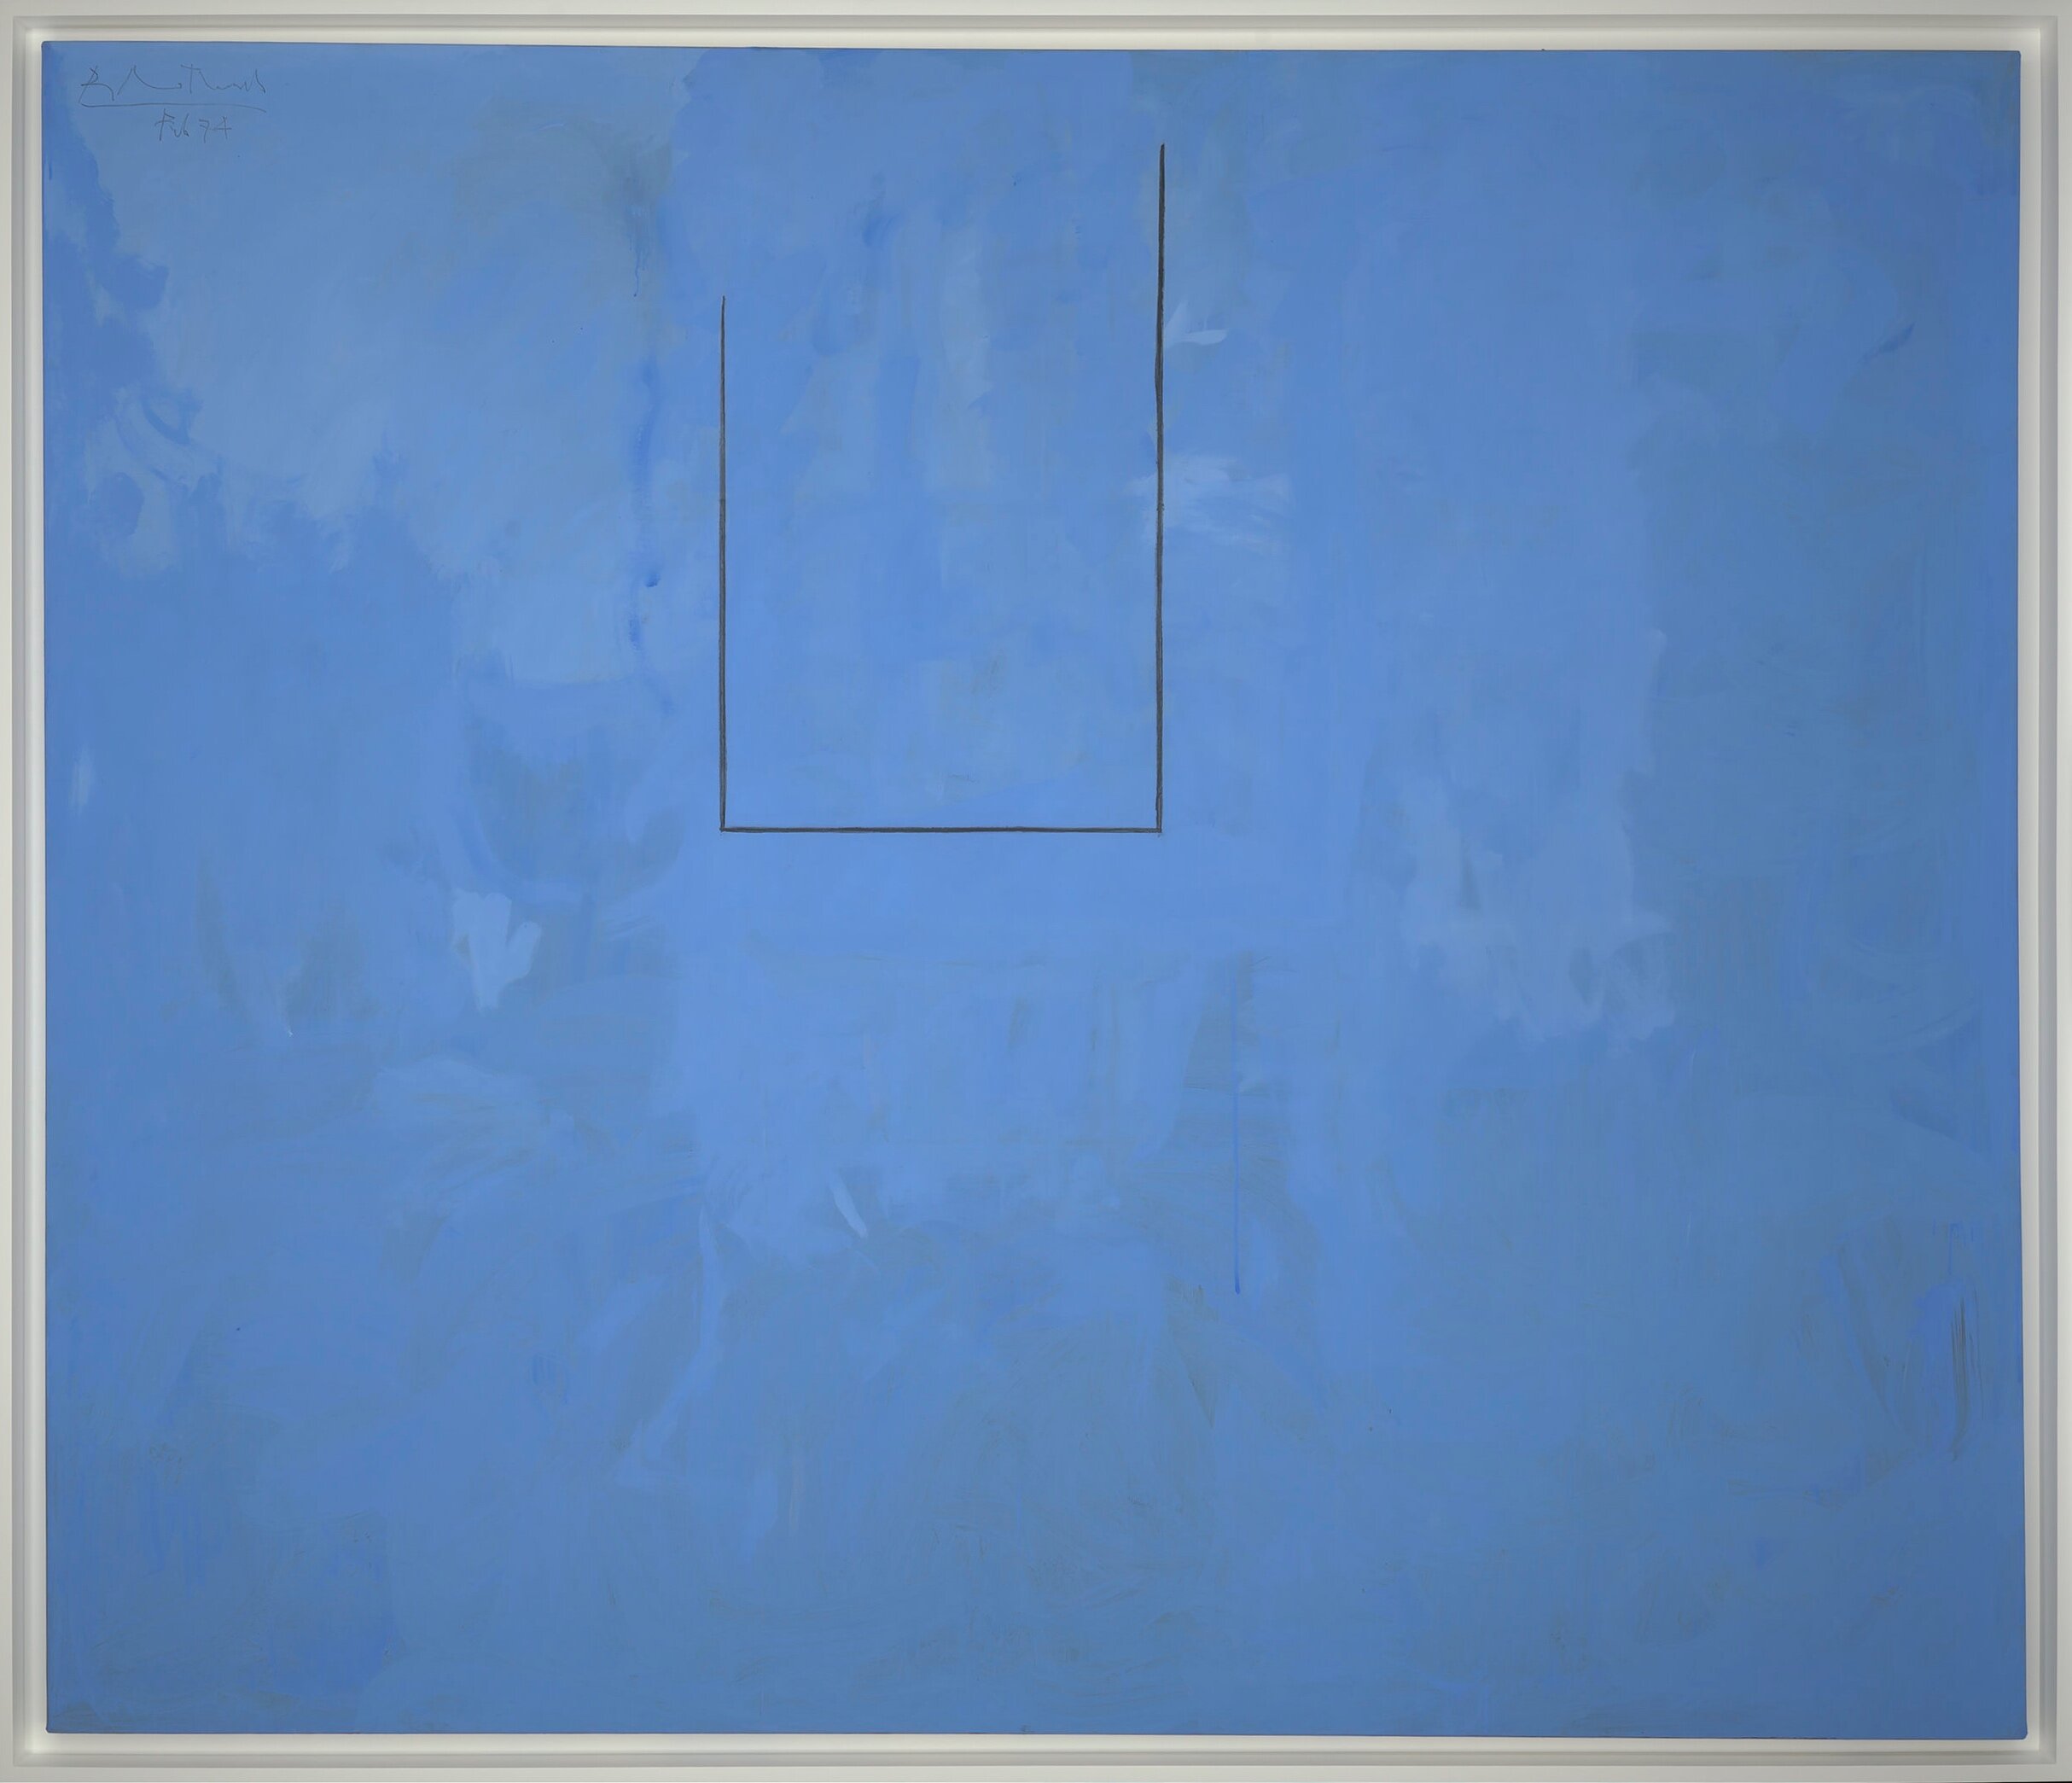  &nbsp;ROBERT MOTHERWELL (1915-1991)   Blueness of Blue , 1974.&nbsp;Acrylic and charcoal on canvas.&nbsp;72 x 84 inches. 